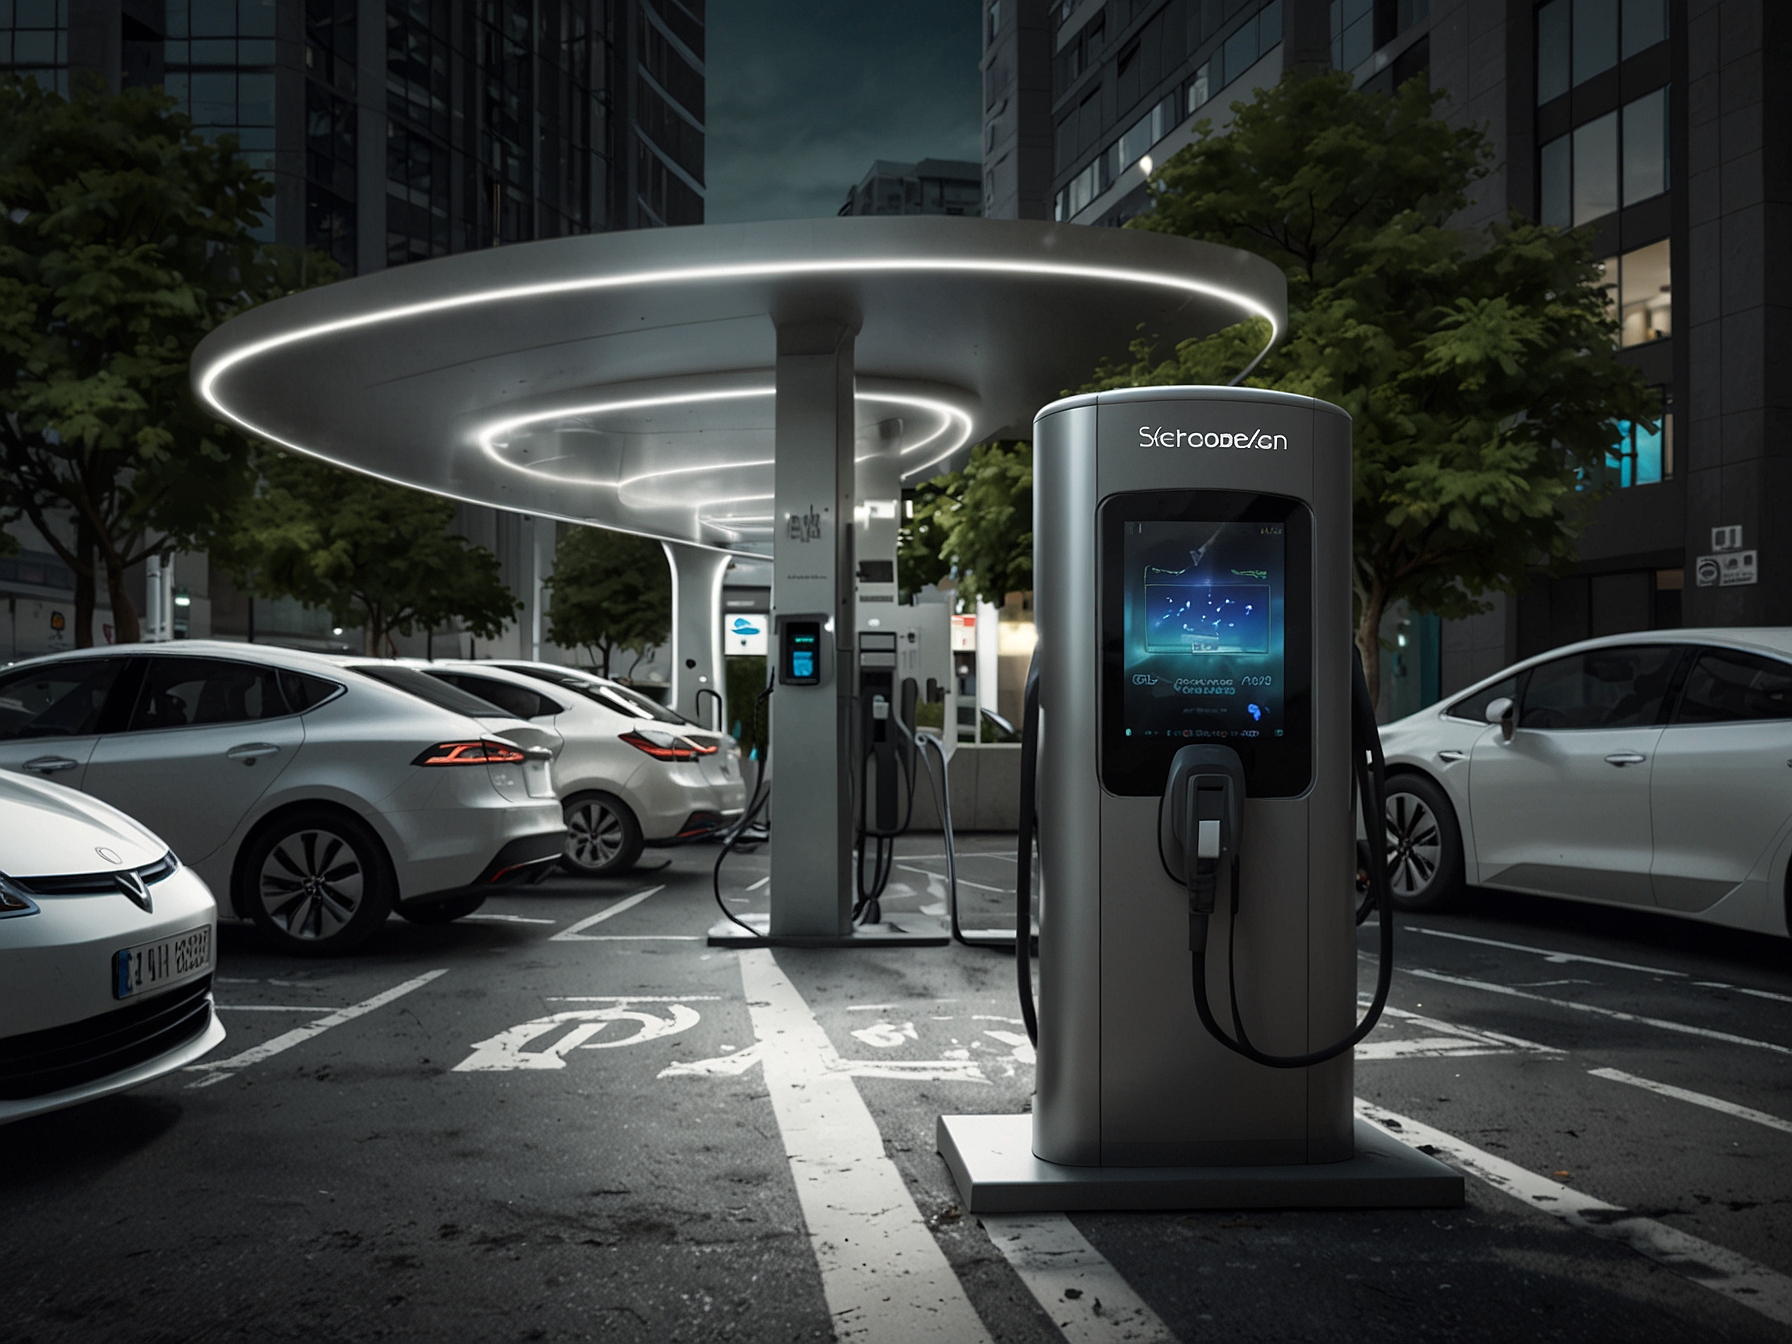 An image showing an EV charging station in a busy urban area, illustrating the need for increased infrastructure to support widespread EV adoption and alleviate consumer concerns.